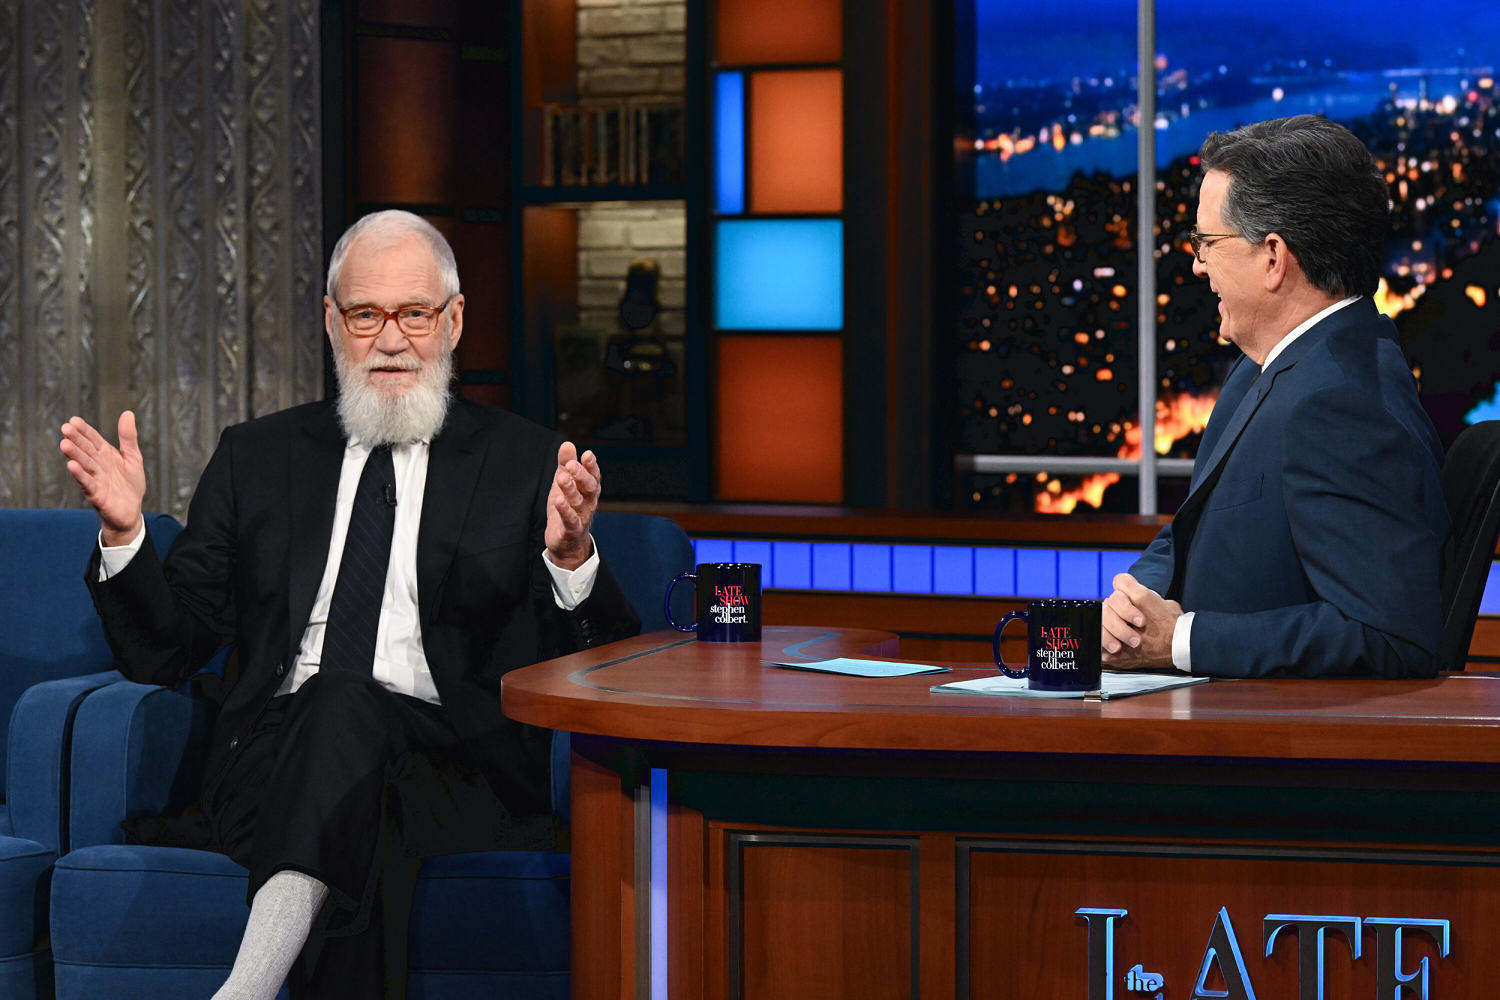 David Letterman returns to ‘The Late Show’  for the first time in 8 years